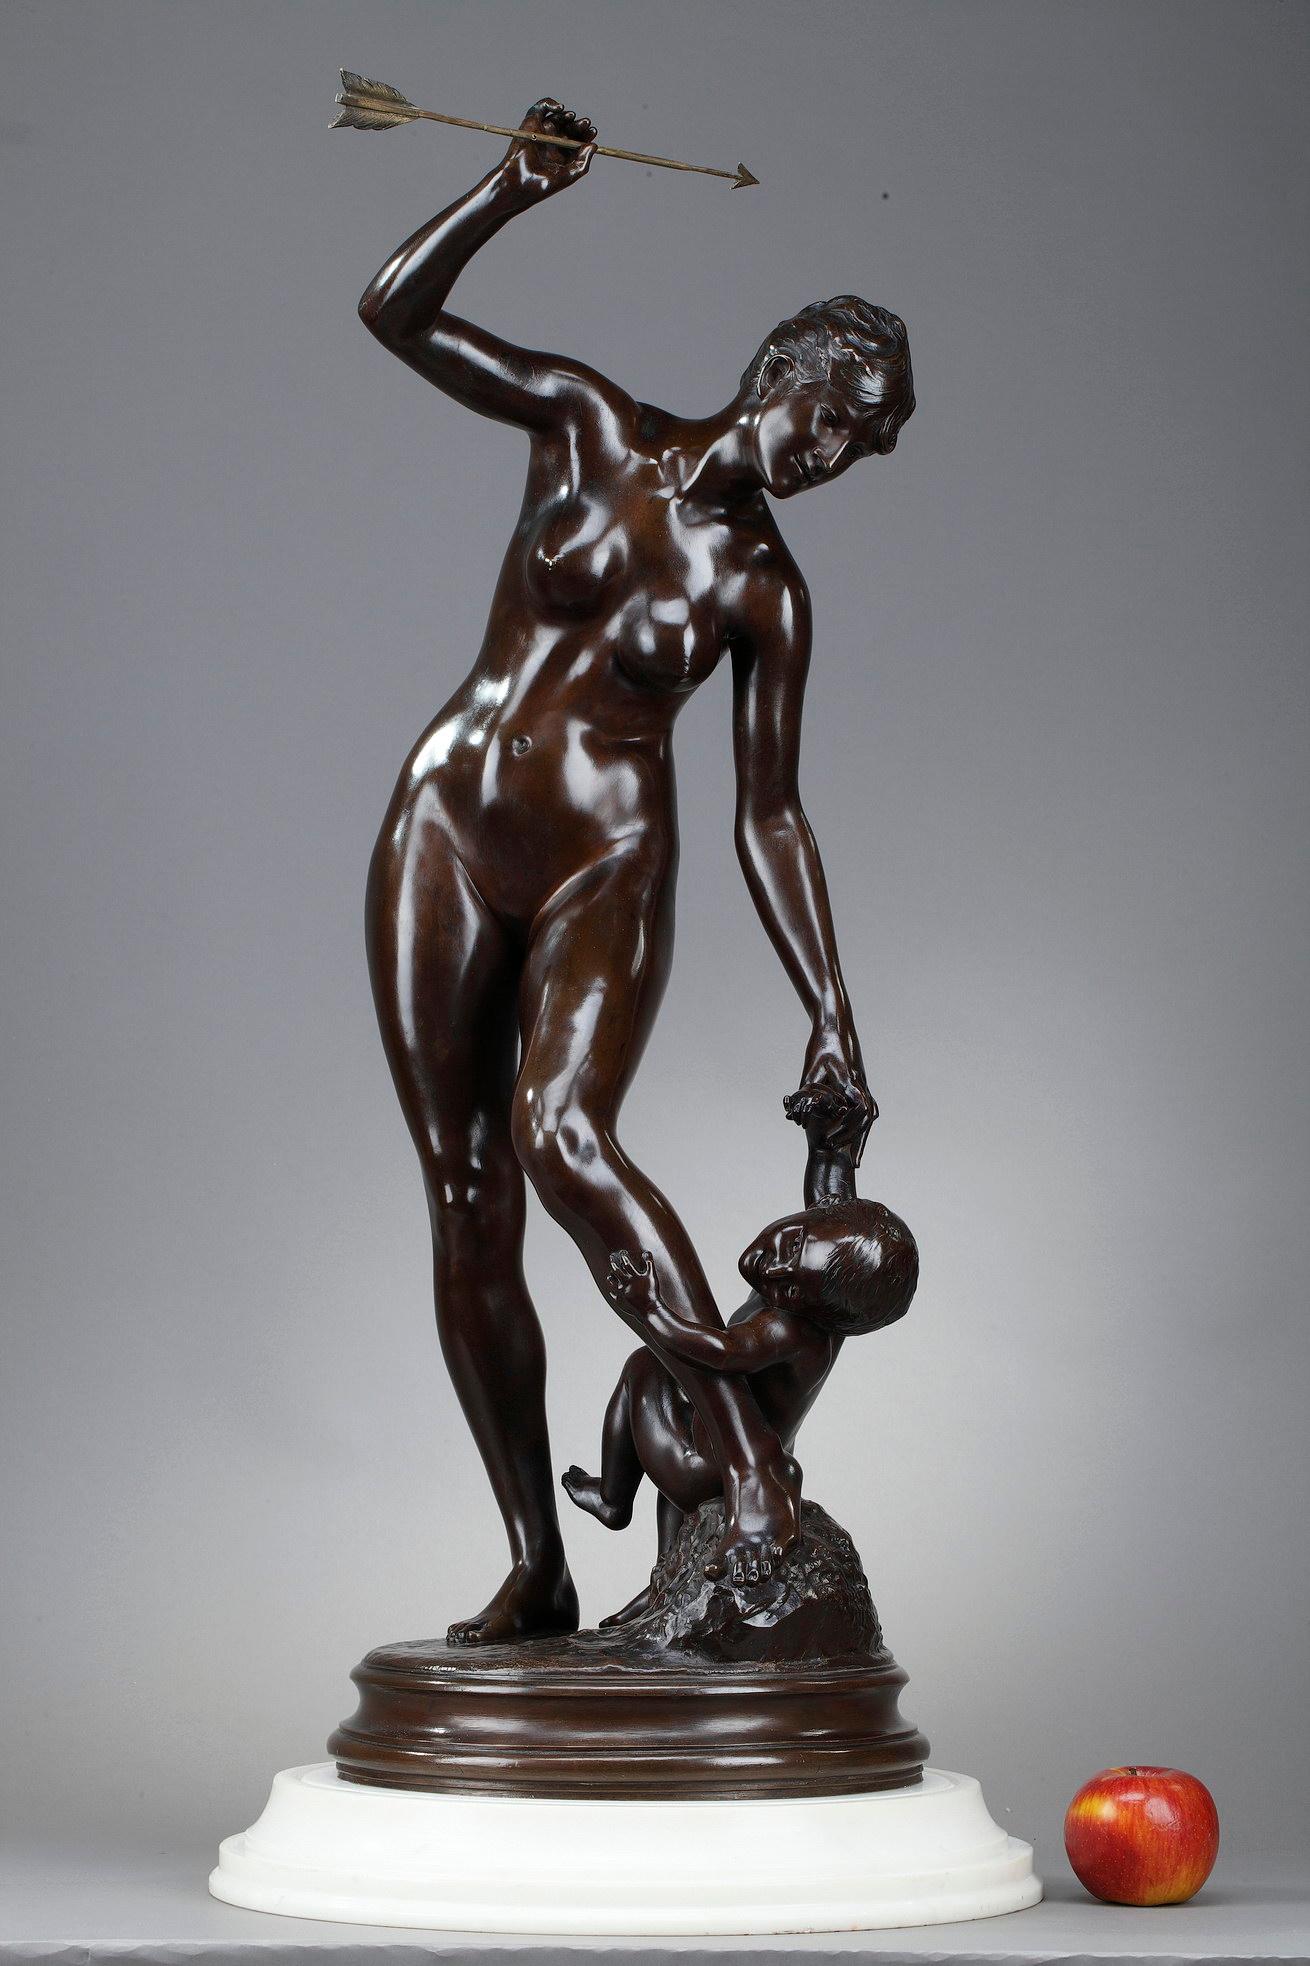 Bronze sculpture with brown patina signed Edmé Antony Paul Noël (1845-1909), representing Venus and her son, Love. Venus, naked, is holding an arrow that she has just snatched from the hands of Love that she is holding with the other hand at her